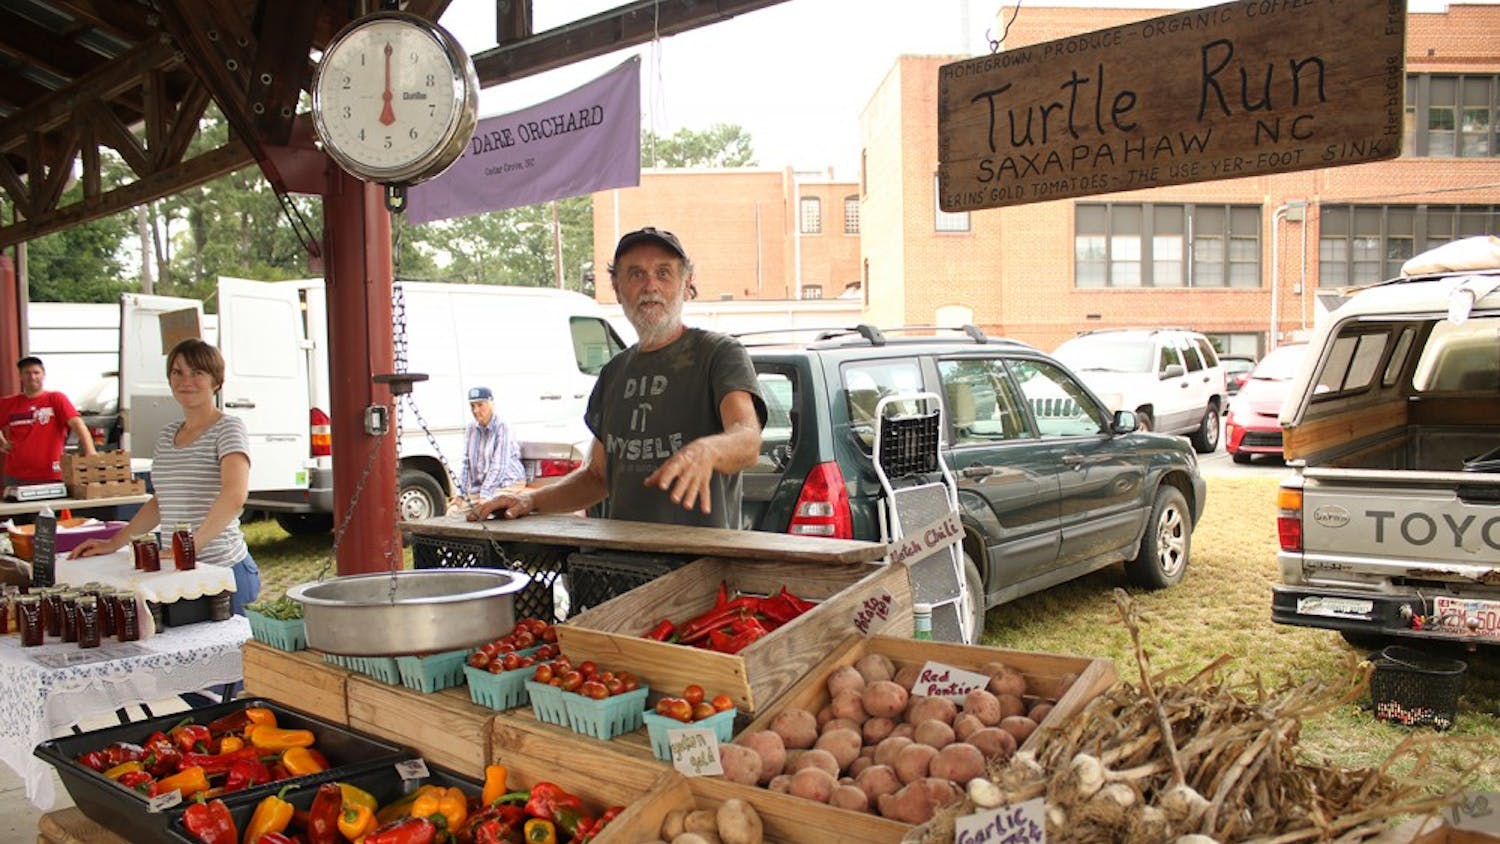 Kevin Meehan, a vendor at the Carrboro Farmer's Market, explains his scale at his booth. He sells homegrown produce from Turtle Run, his farm in Saxapahaw, NC.